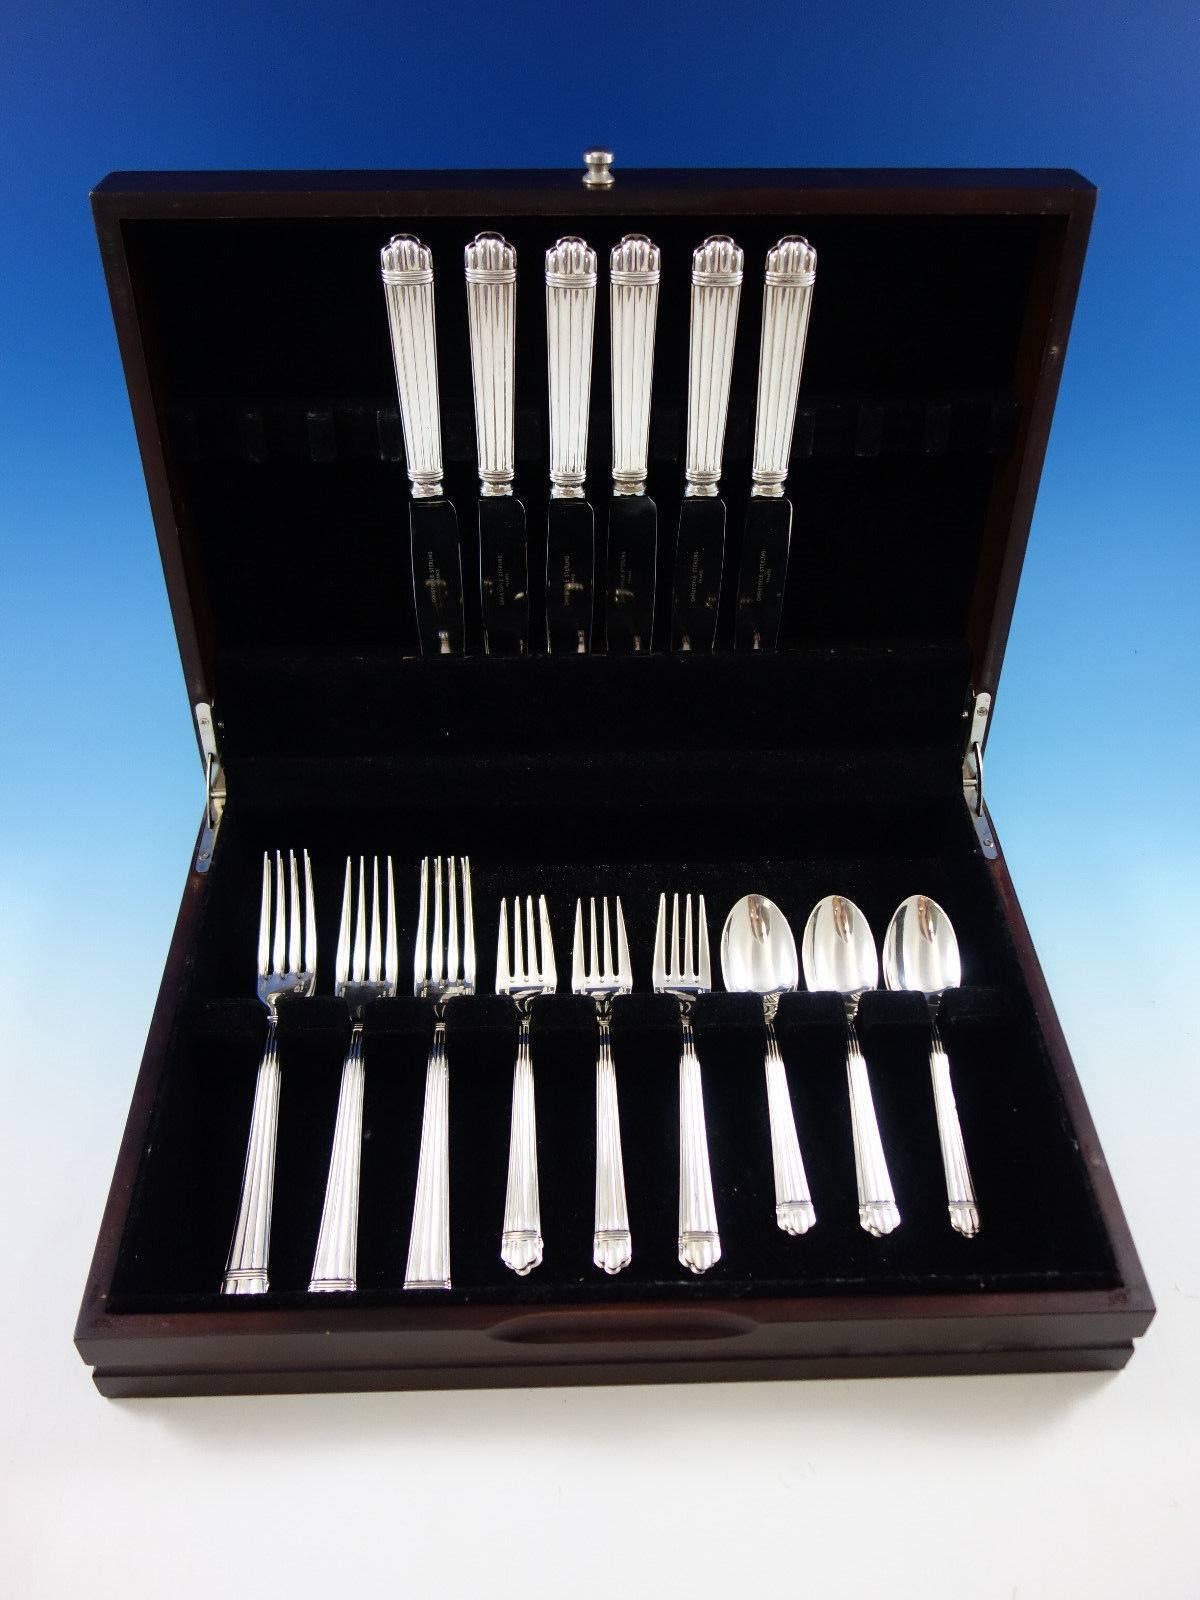 Exceptional dinner size aria by Christofle France sterling silver flatware set of 24 pieces. Great starter set! This set includes: six dinner size knives, 9 3/4